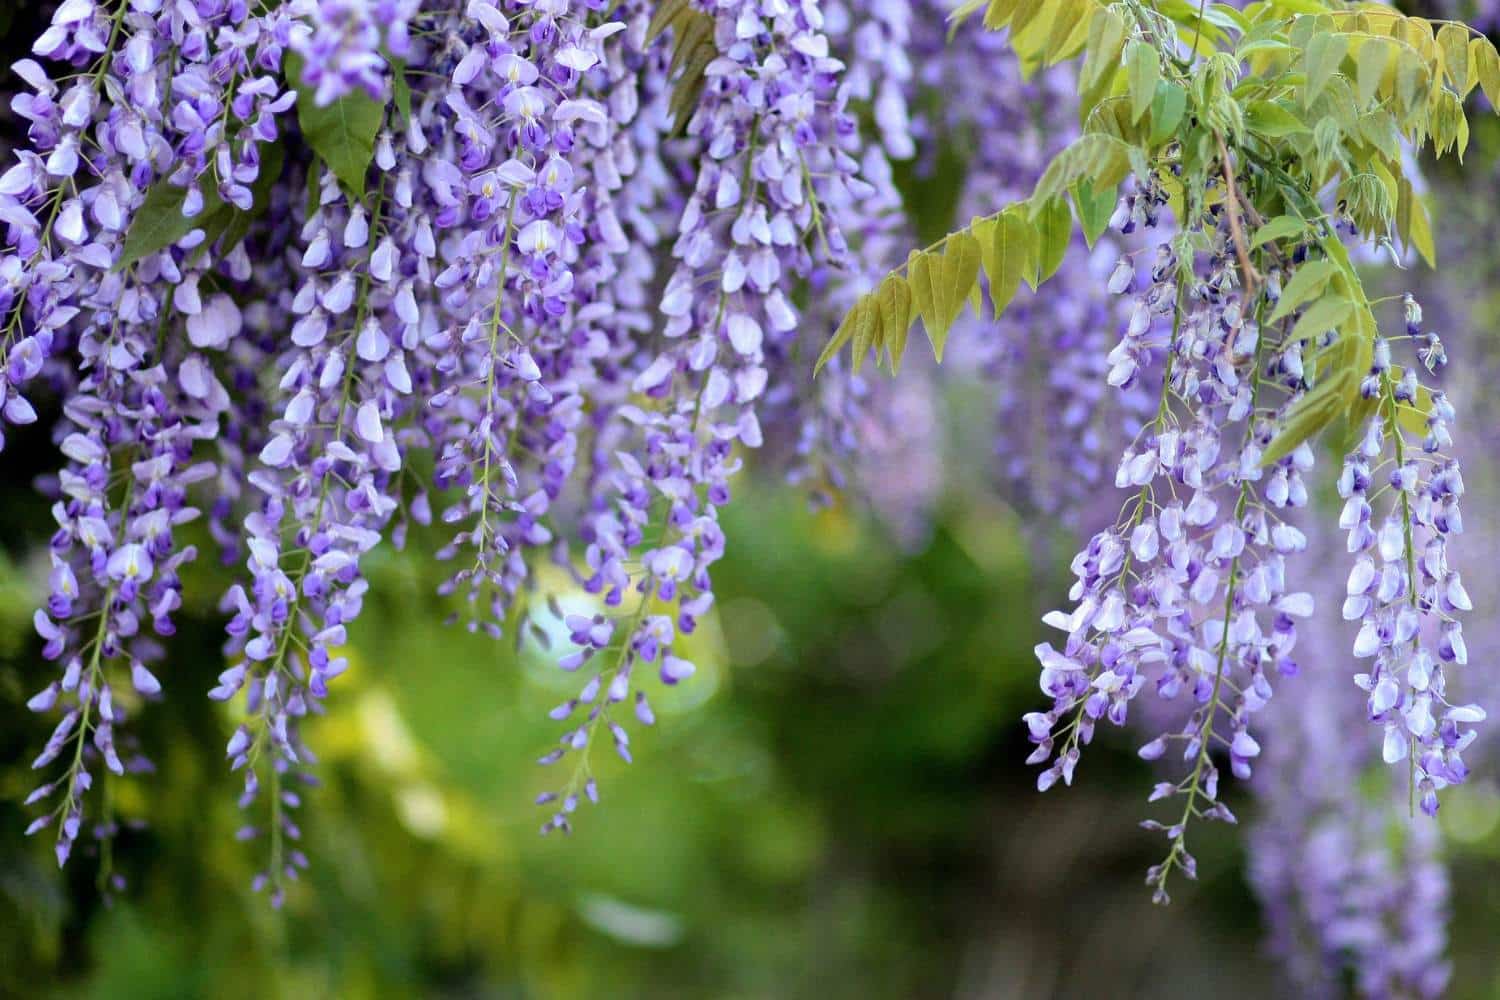 A purple wisteria hanging from a tree.